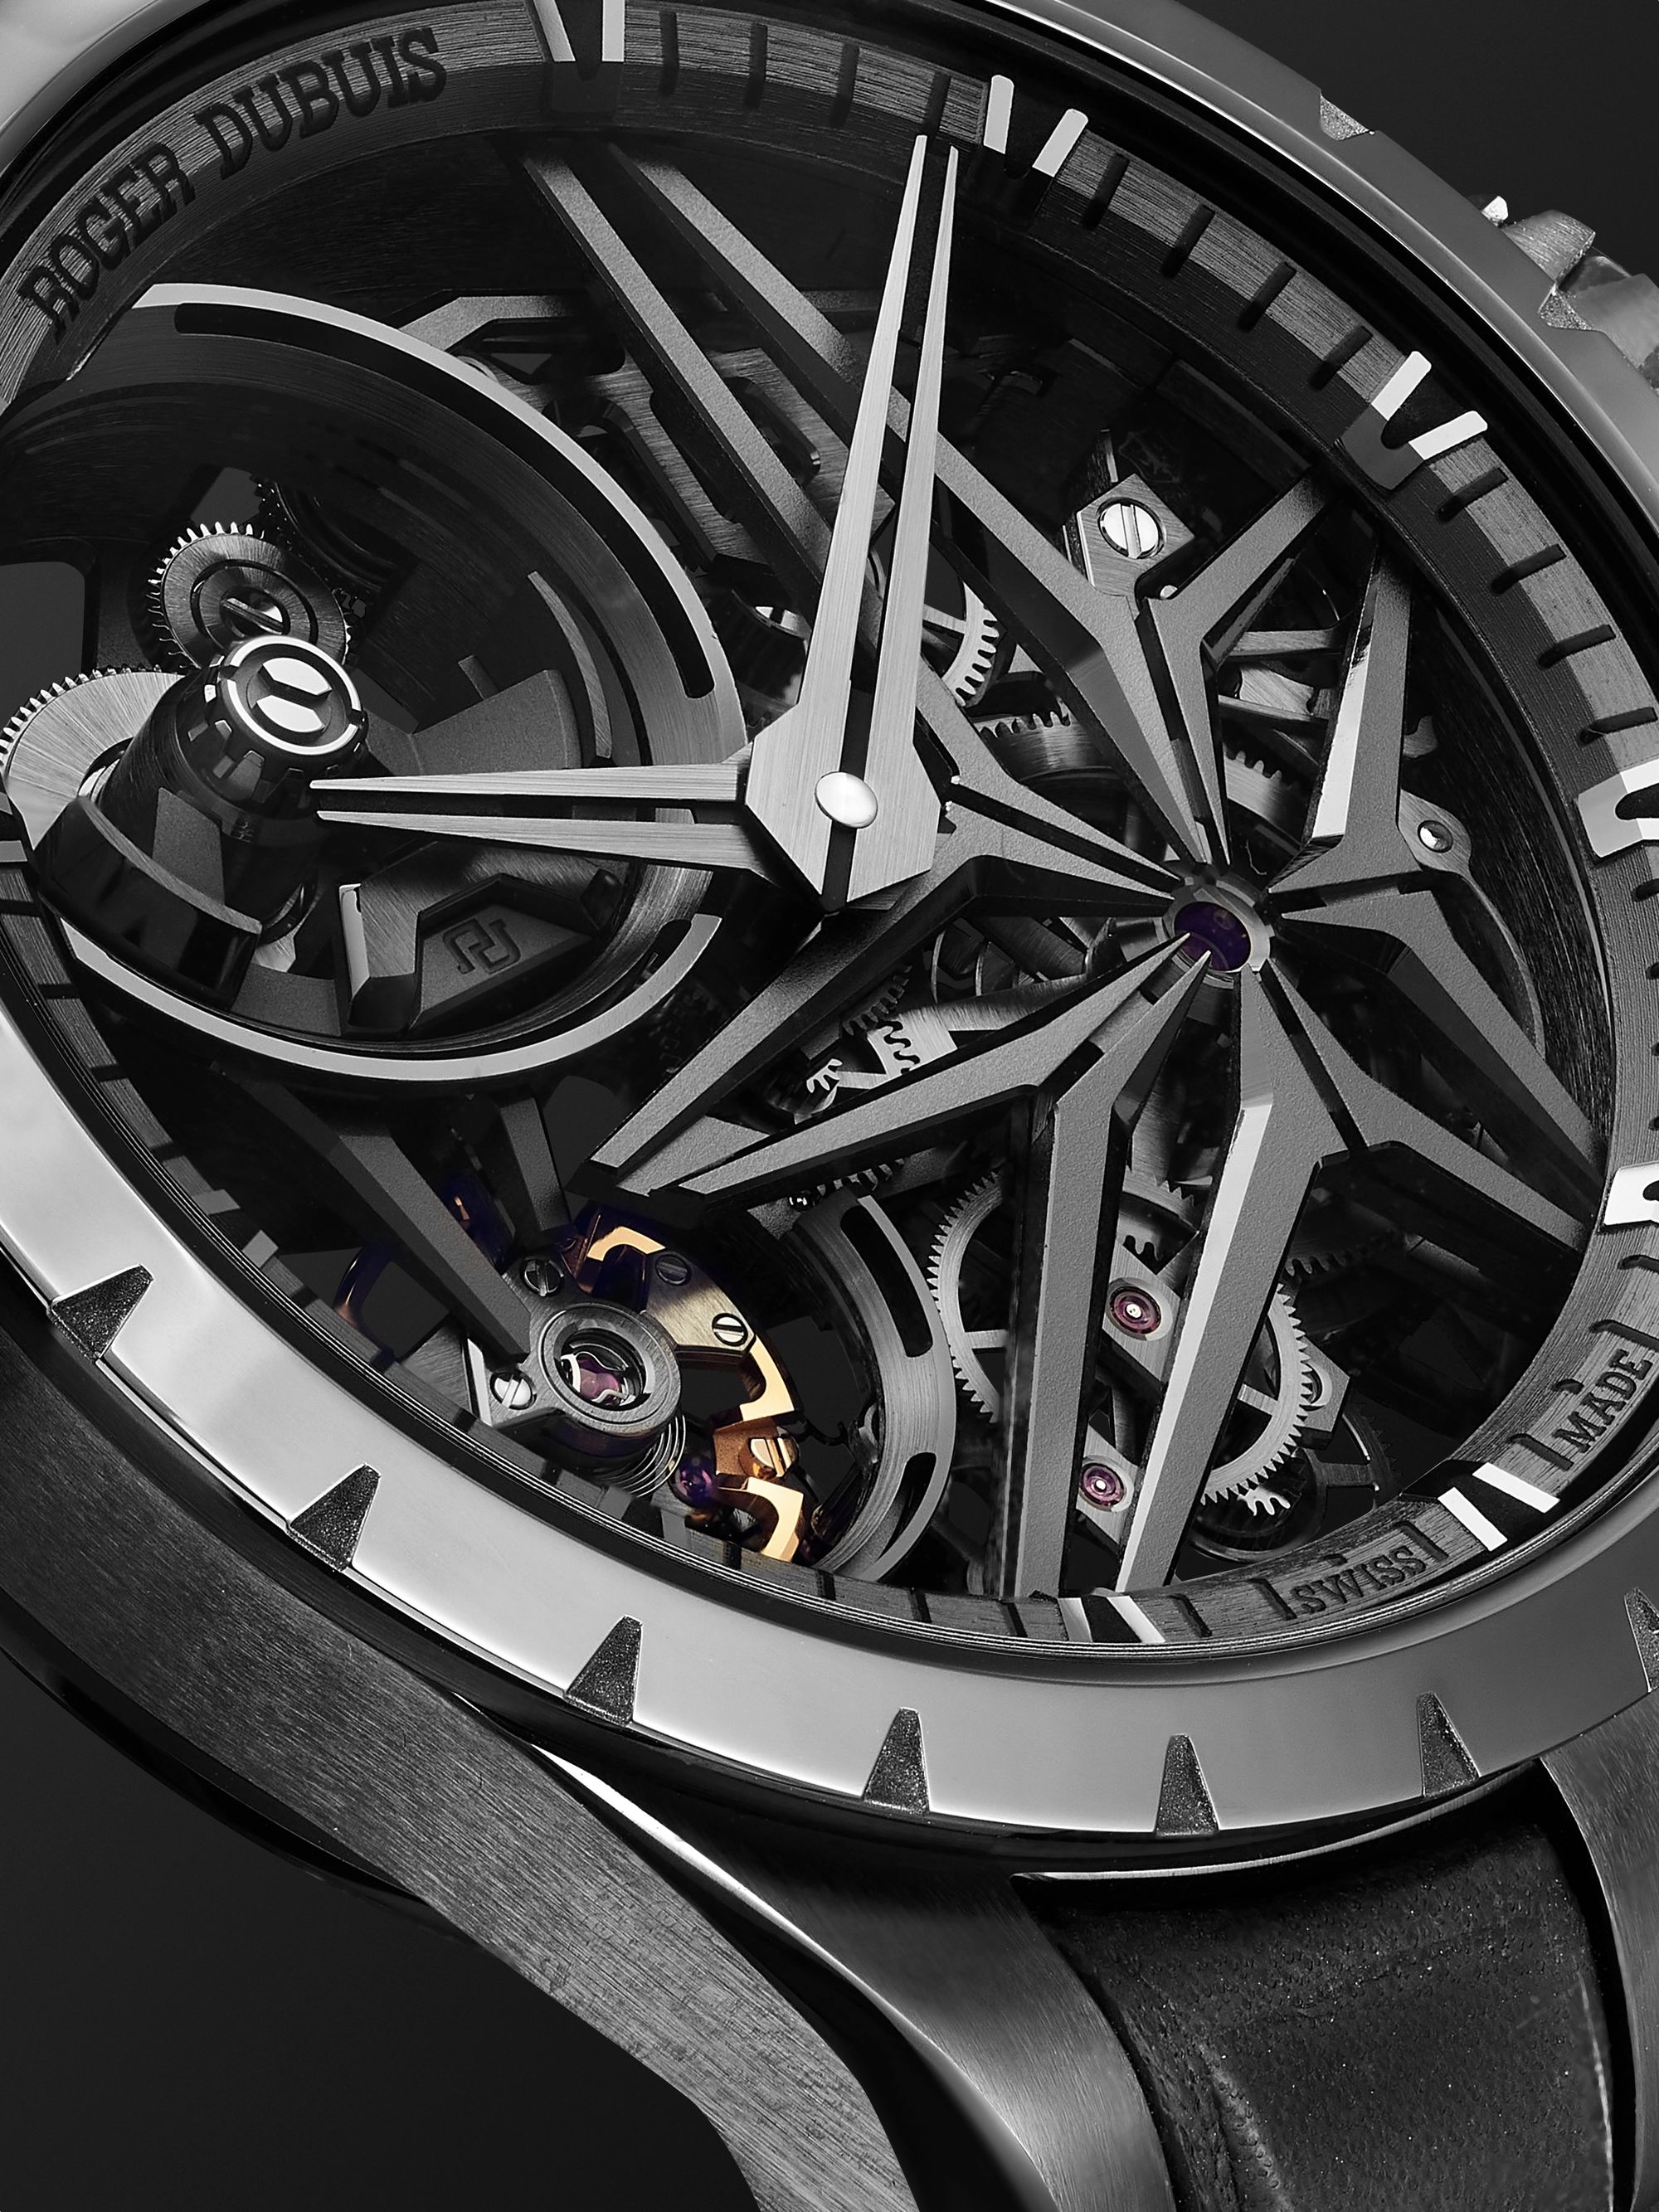 ROGER DUBUIS Excalibur MB Automatic Skeleton 42mm Ceramic and Leather Watch, Ref. No. DBEX0955